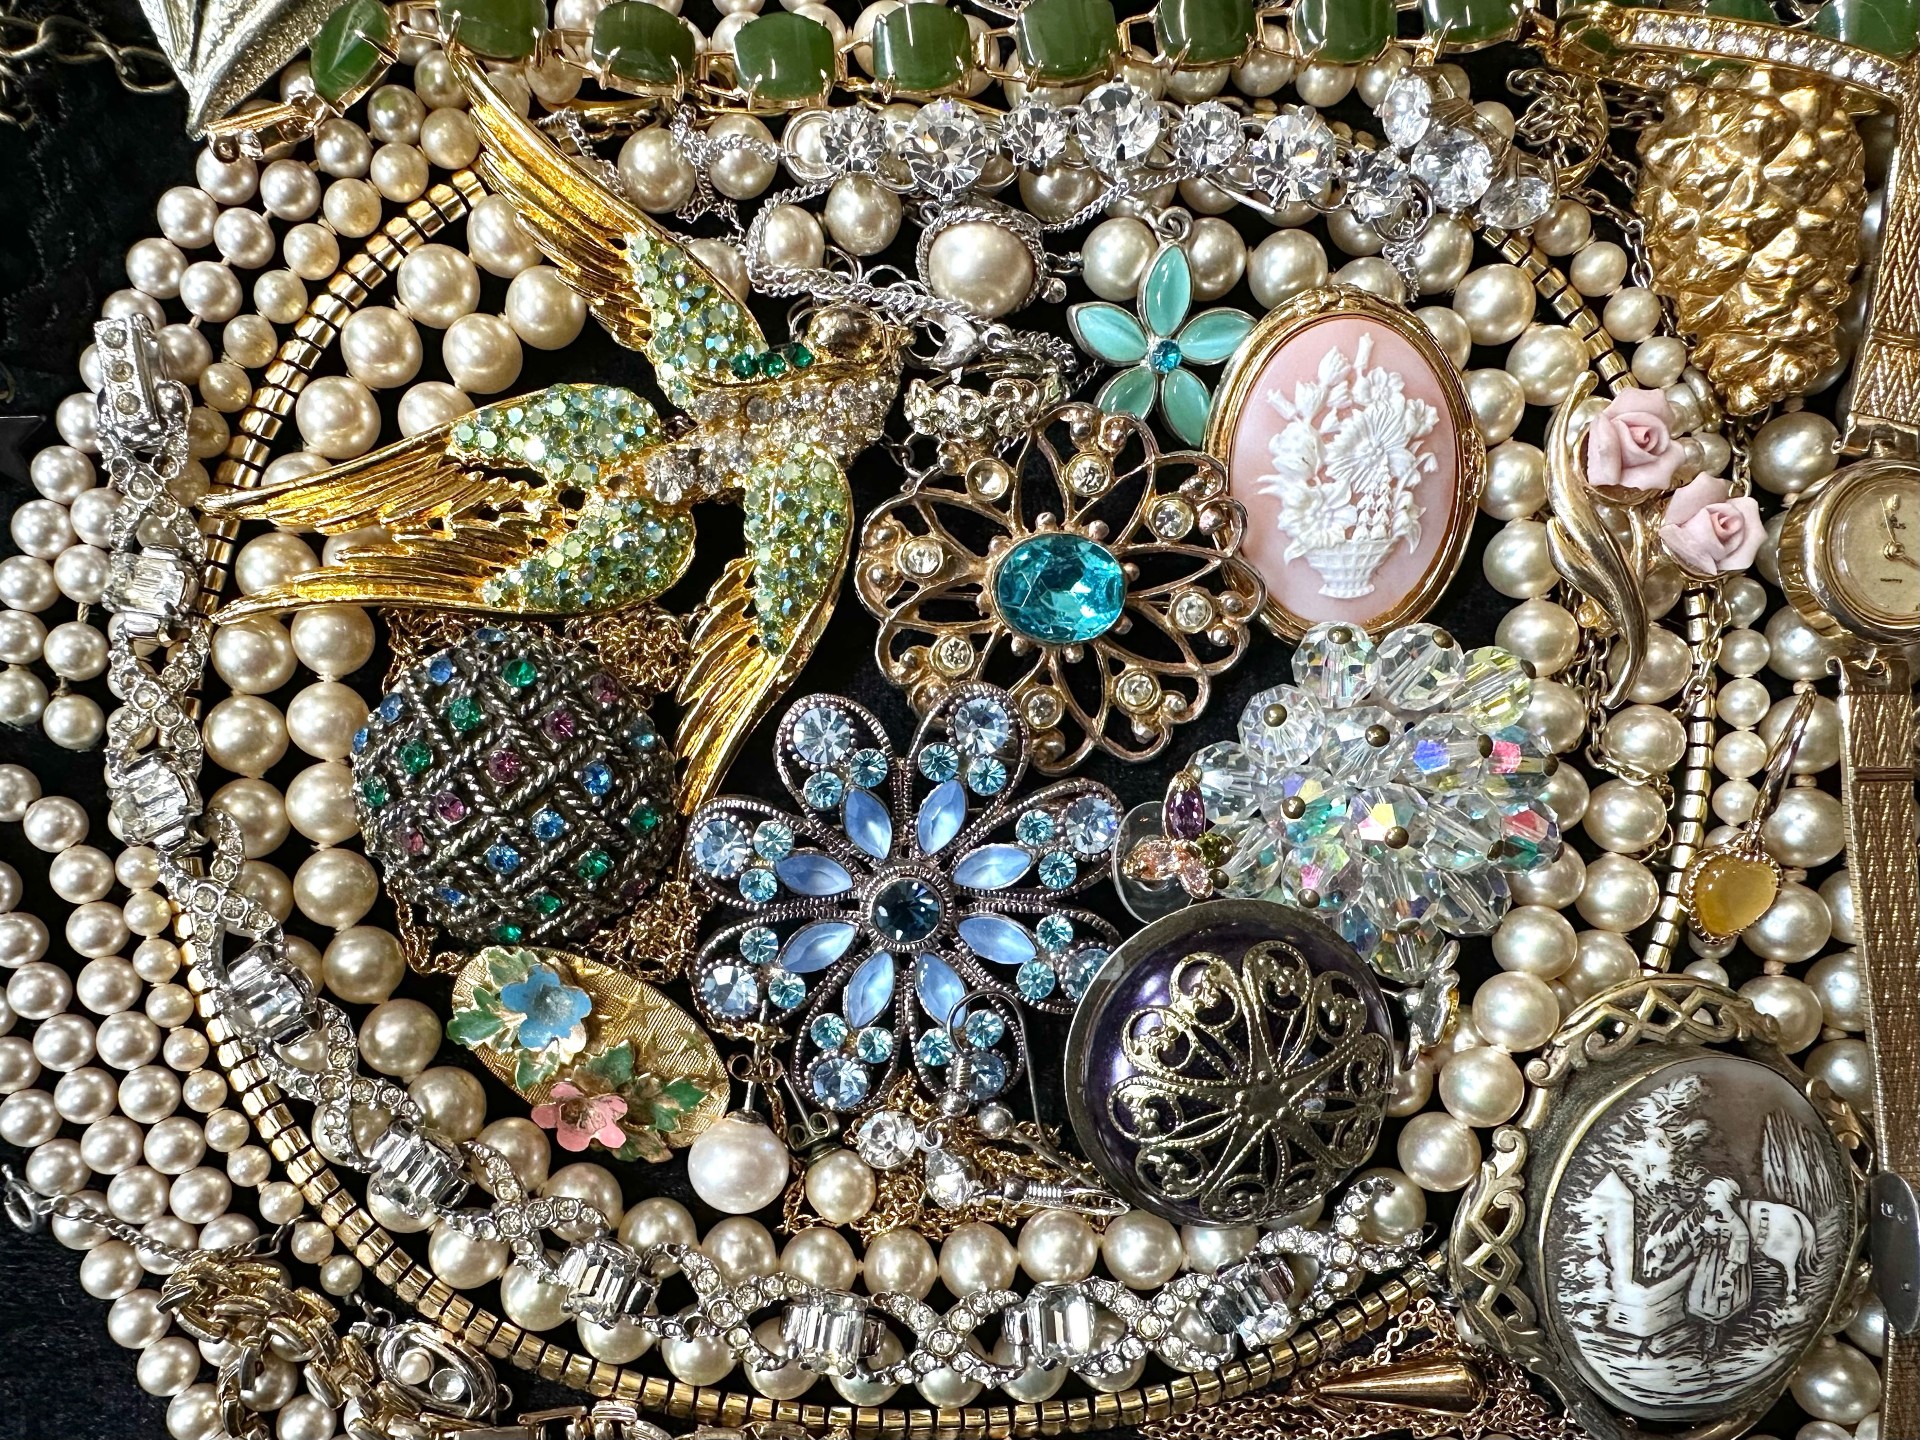 Collection of Quality Costume Jewellery, including pearls, necklaces, chains, bracelets, pendants, - Image 2 of 4